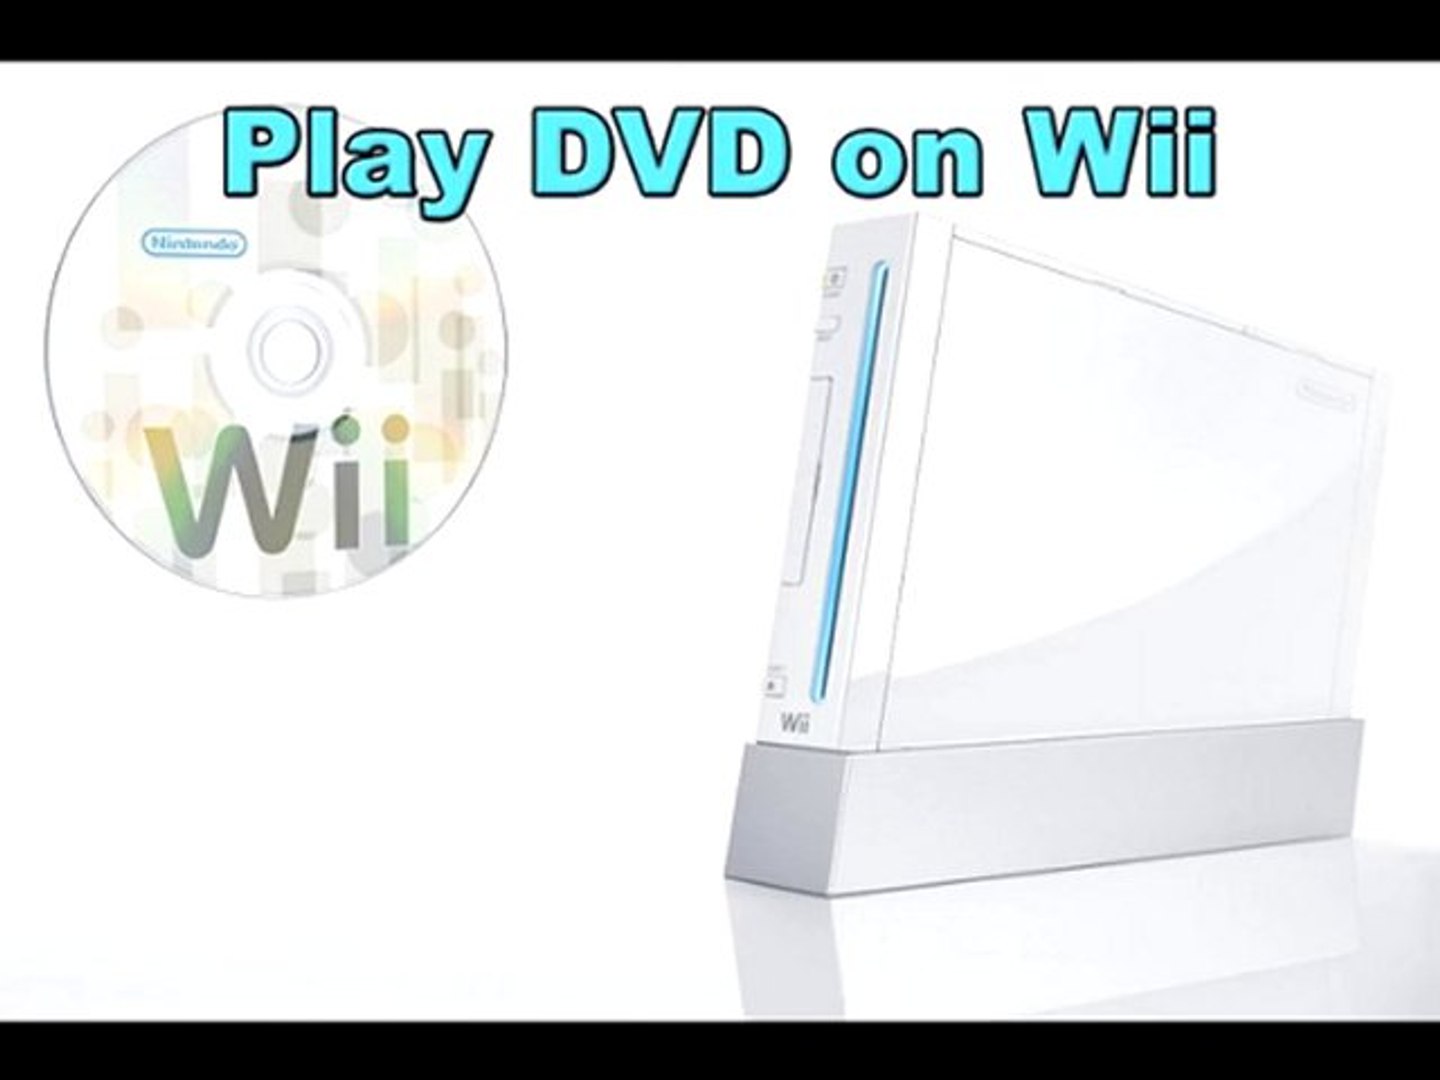 Extreme armoede nicotine kalmeren Play DVD on Wii 4.3-Find out How to Play DVDs on Wii 4.3 Now - video  Dailymotion